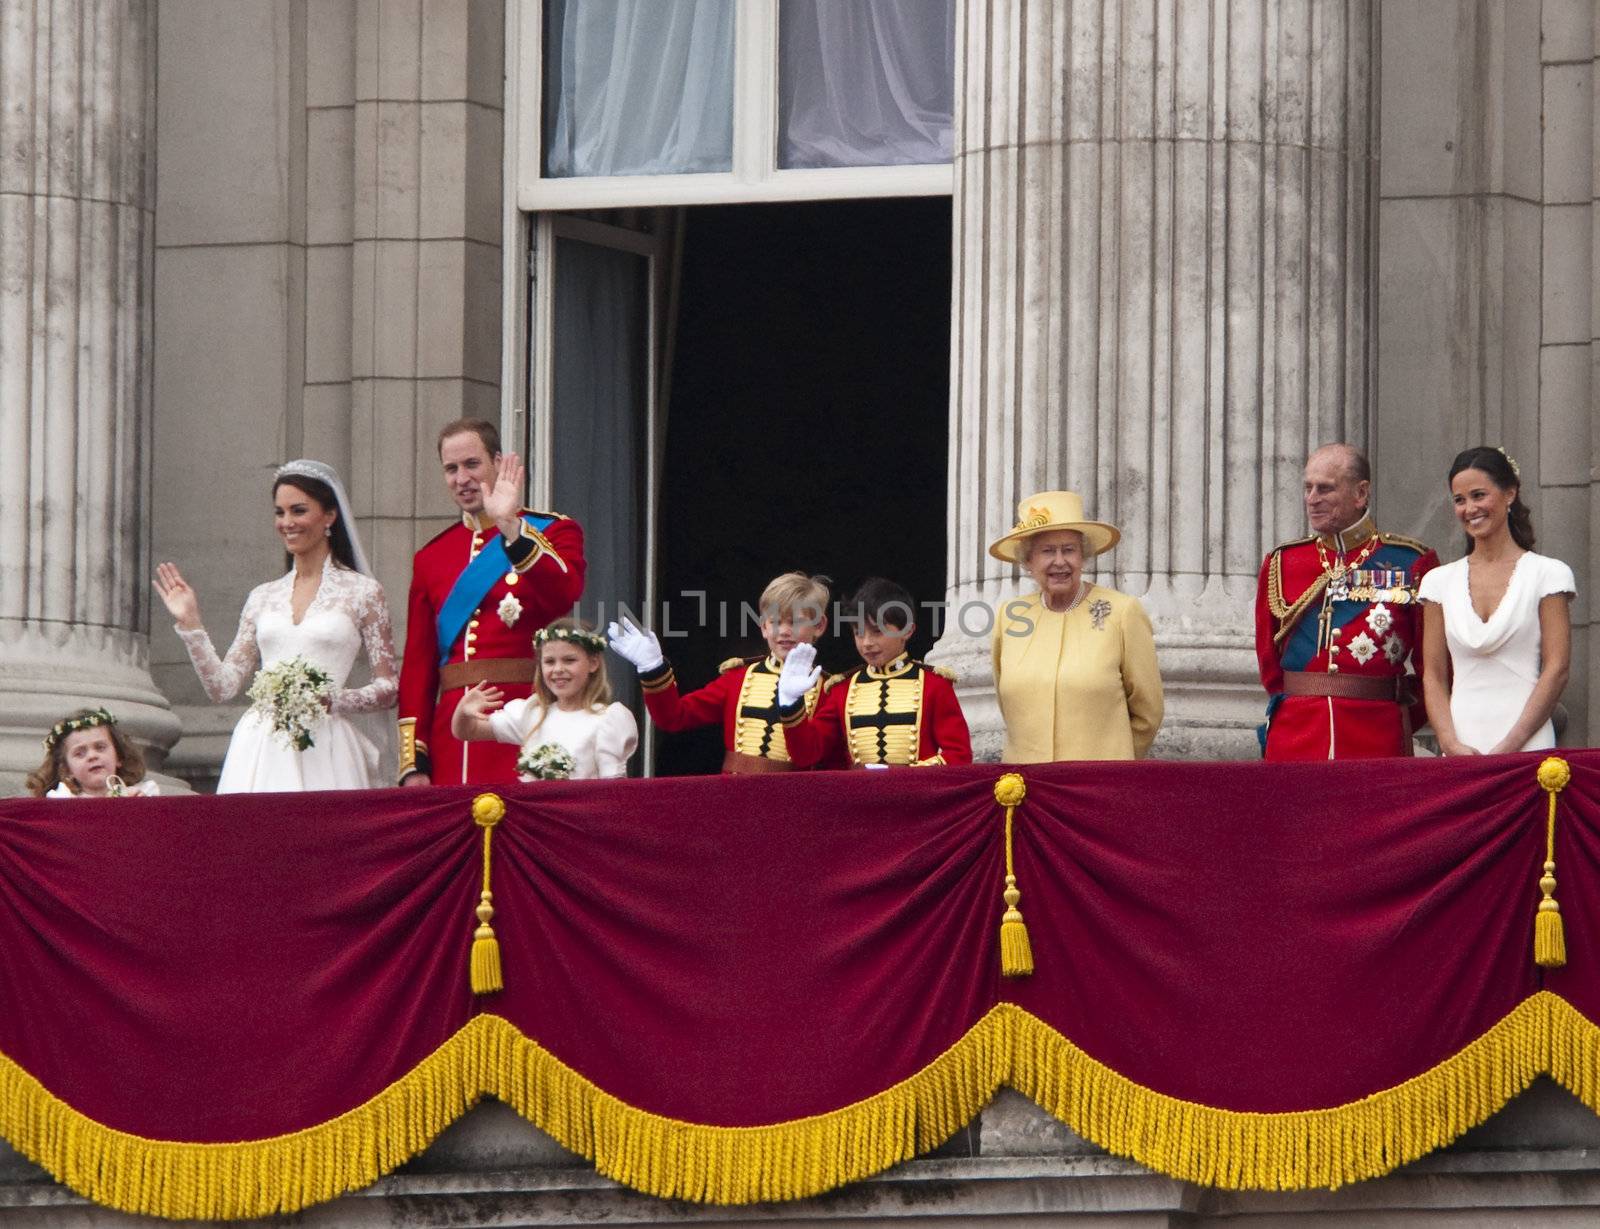 The royal wedding of Prince William and Kate Middleton by dutourdumonde